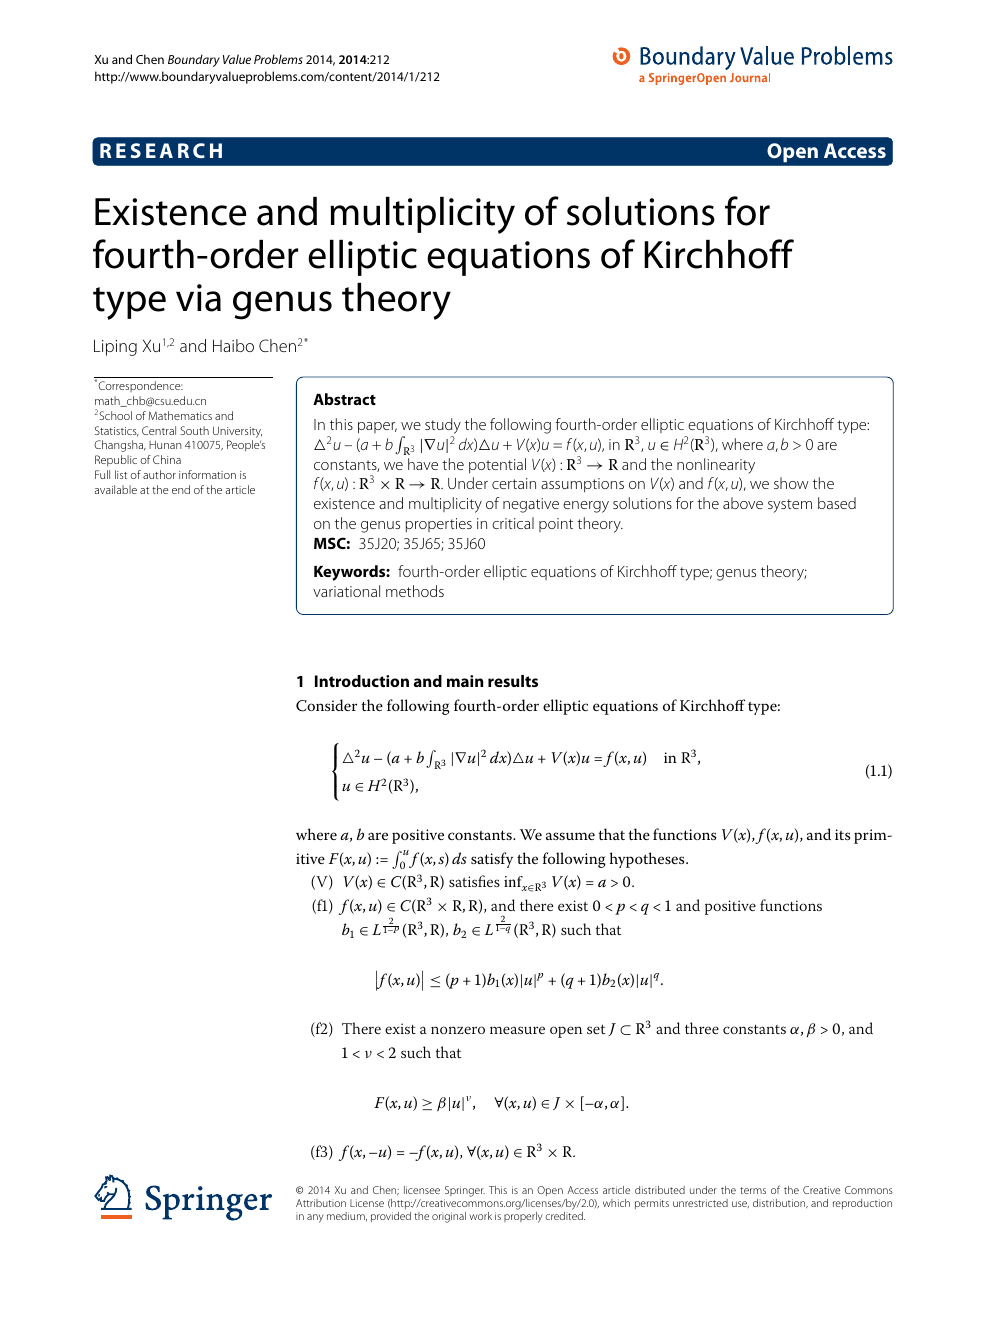 Existence And Multiplicity Of Solutions For Fourth Order Elliptic Equations Of Kirchhoff Type Via Genus Theory Topic Of Research Paper In Mathematics Download Scholarly Article Pdf And Read For Free On Cyberleninka